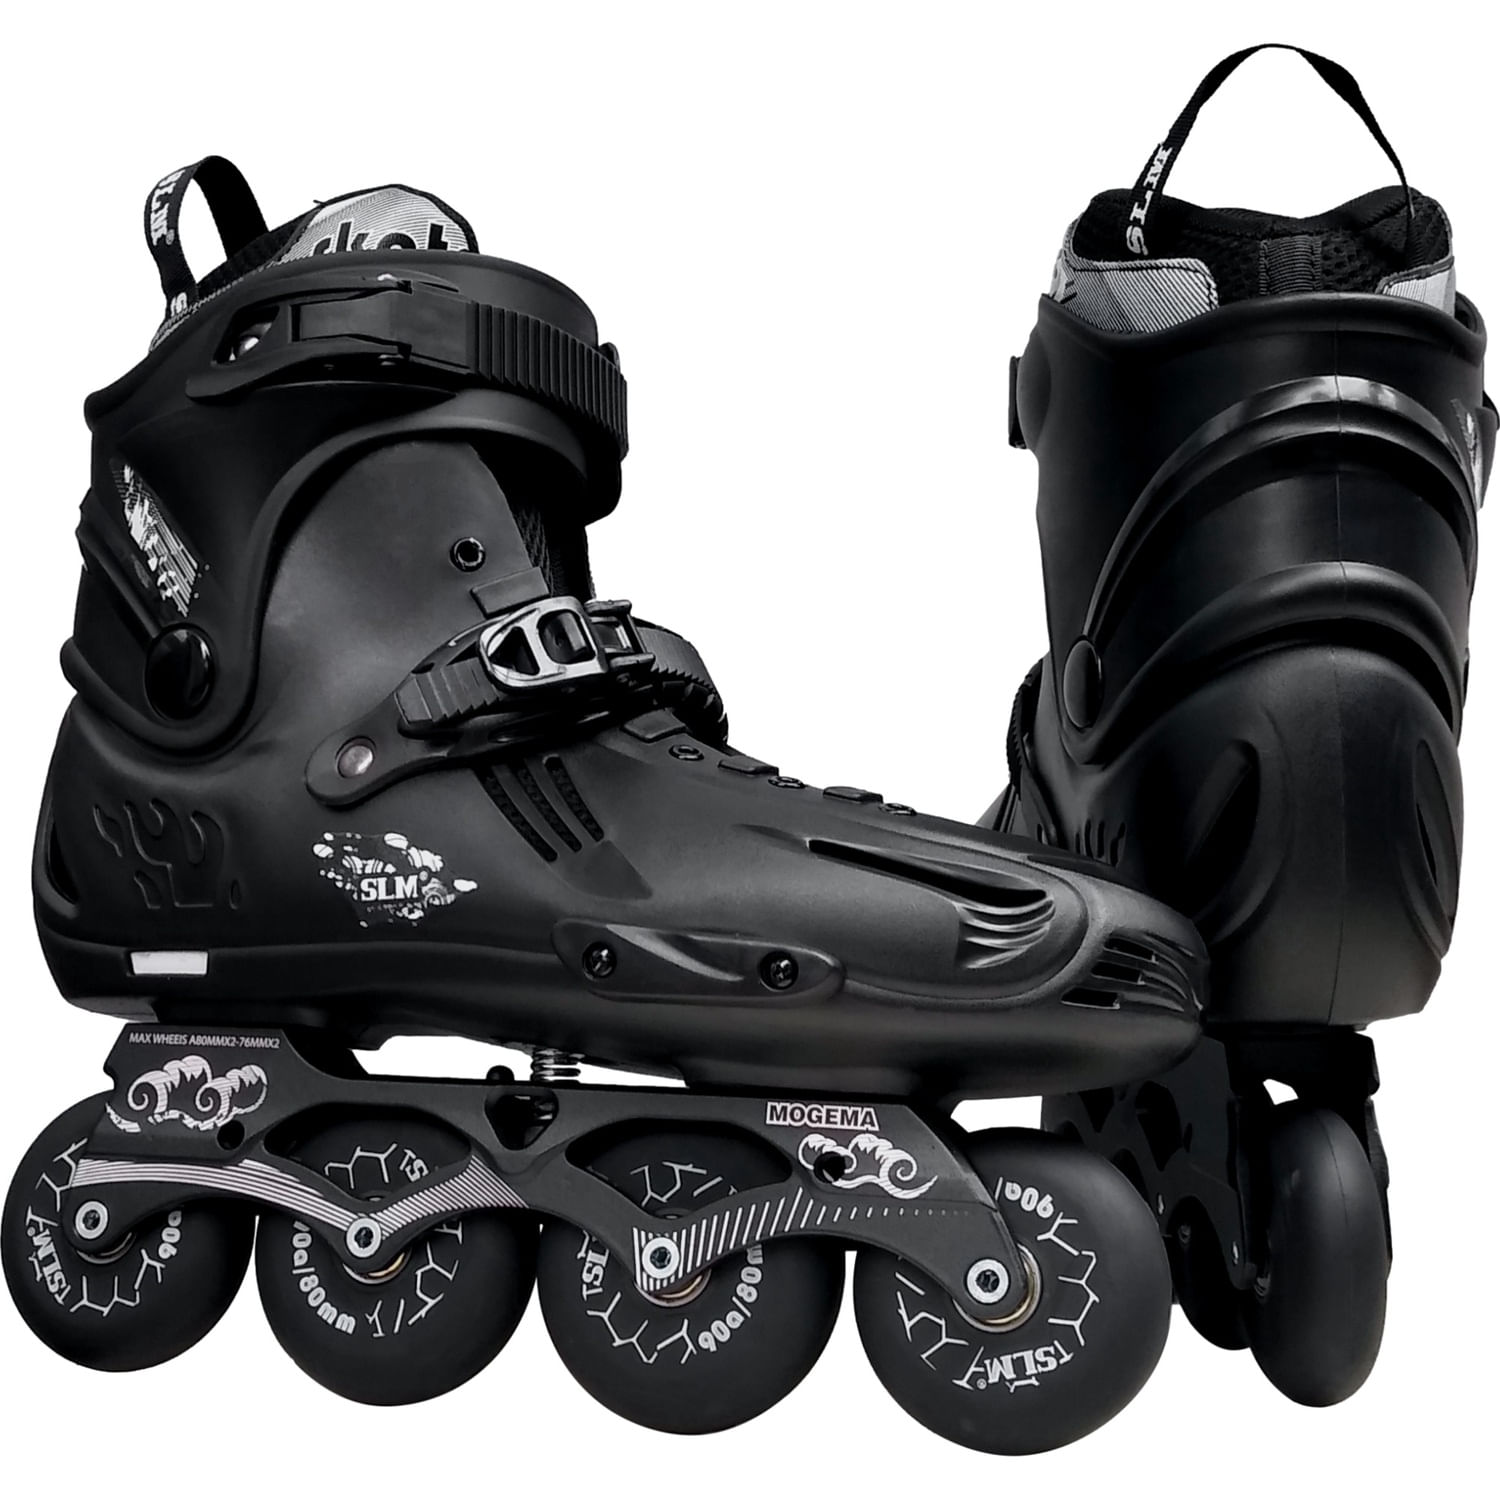 Patines Lineales T/39 SLM Freestyle Profesionales